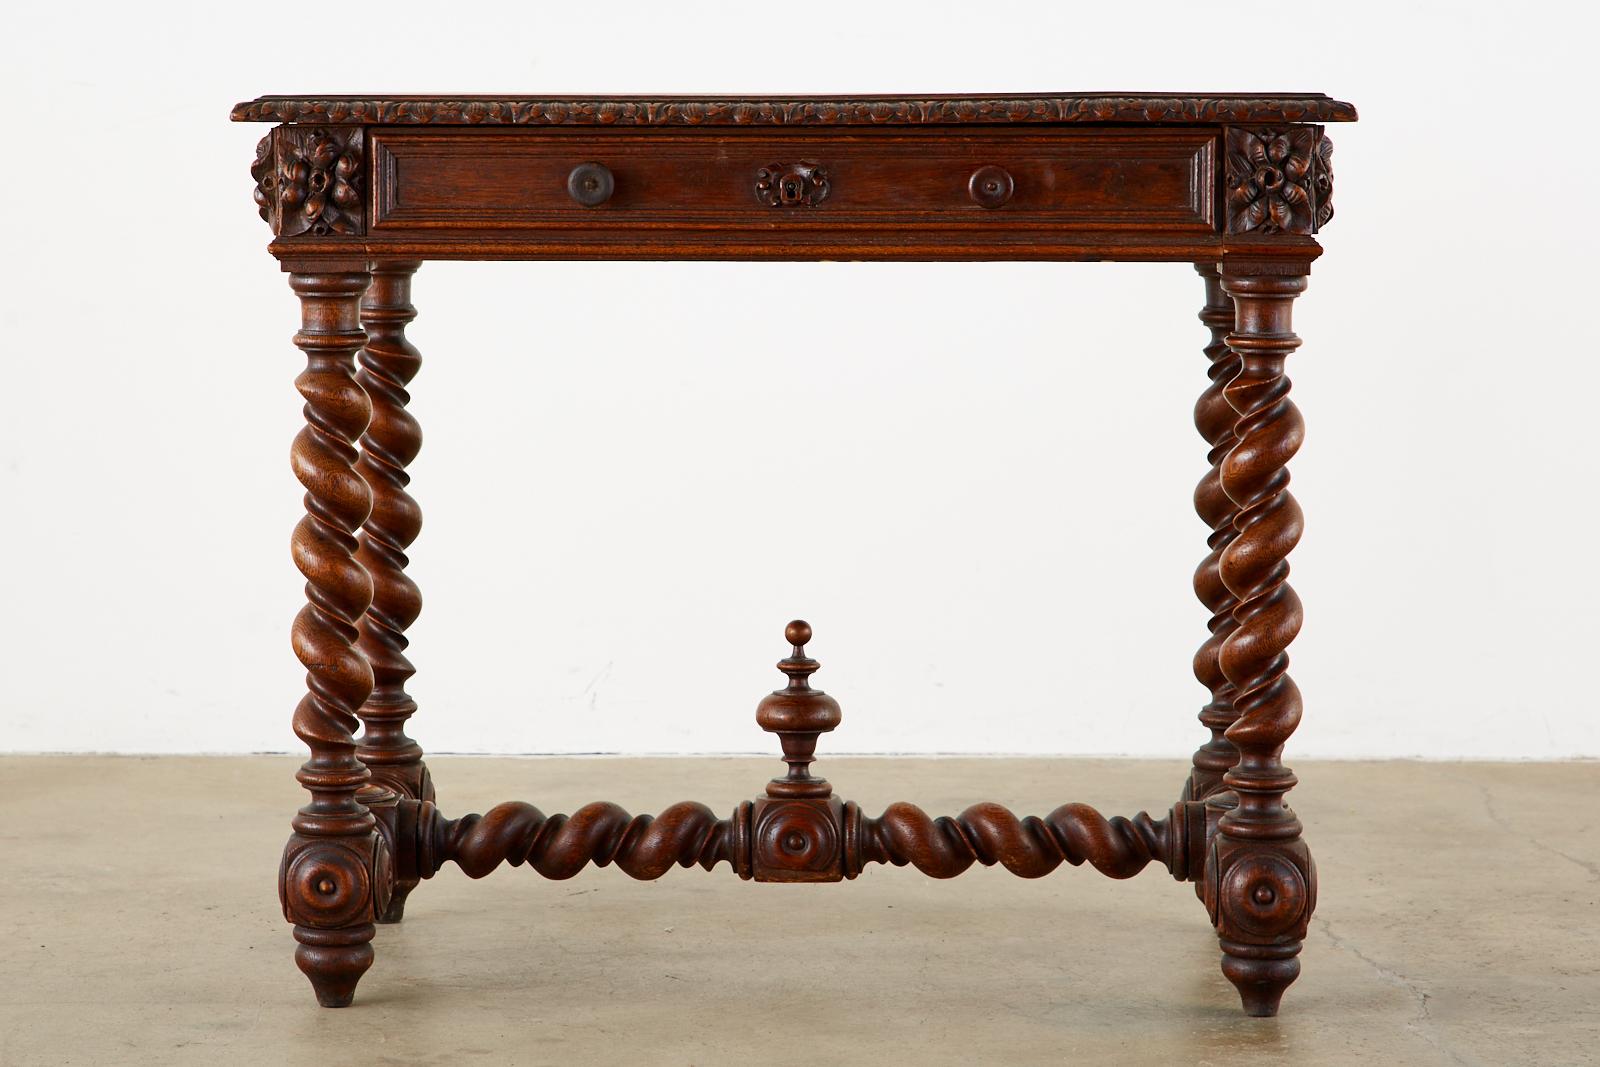 Spectacular 19th century French bureau plat writing table or desk featuring barley twist legs and stretcher. Crafted from oak in the grand Louis XIII style fronted by a large 27 inch storage drawer with round pulls. The case of the desk features